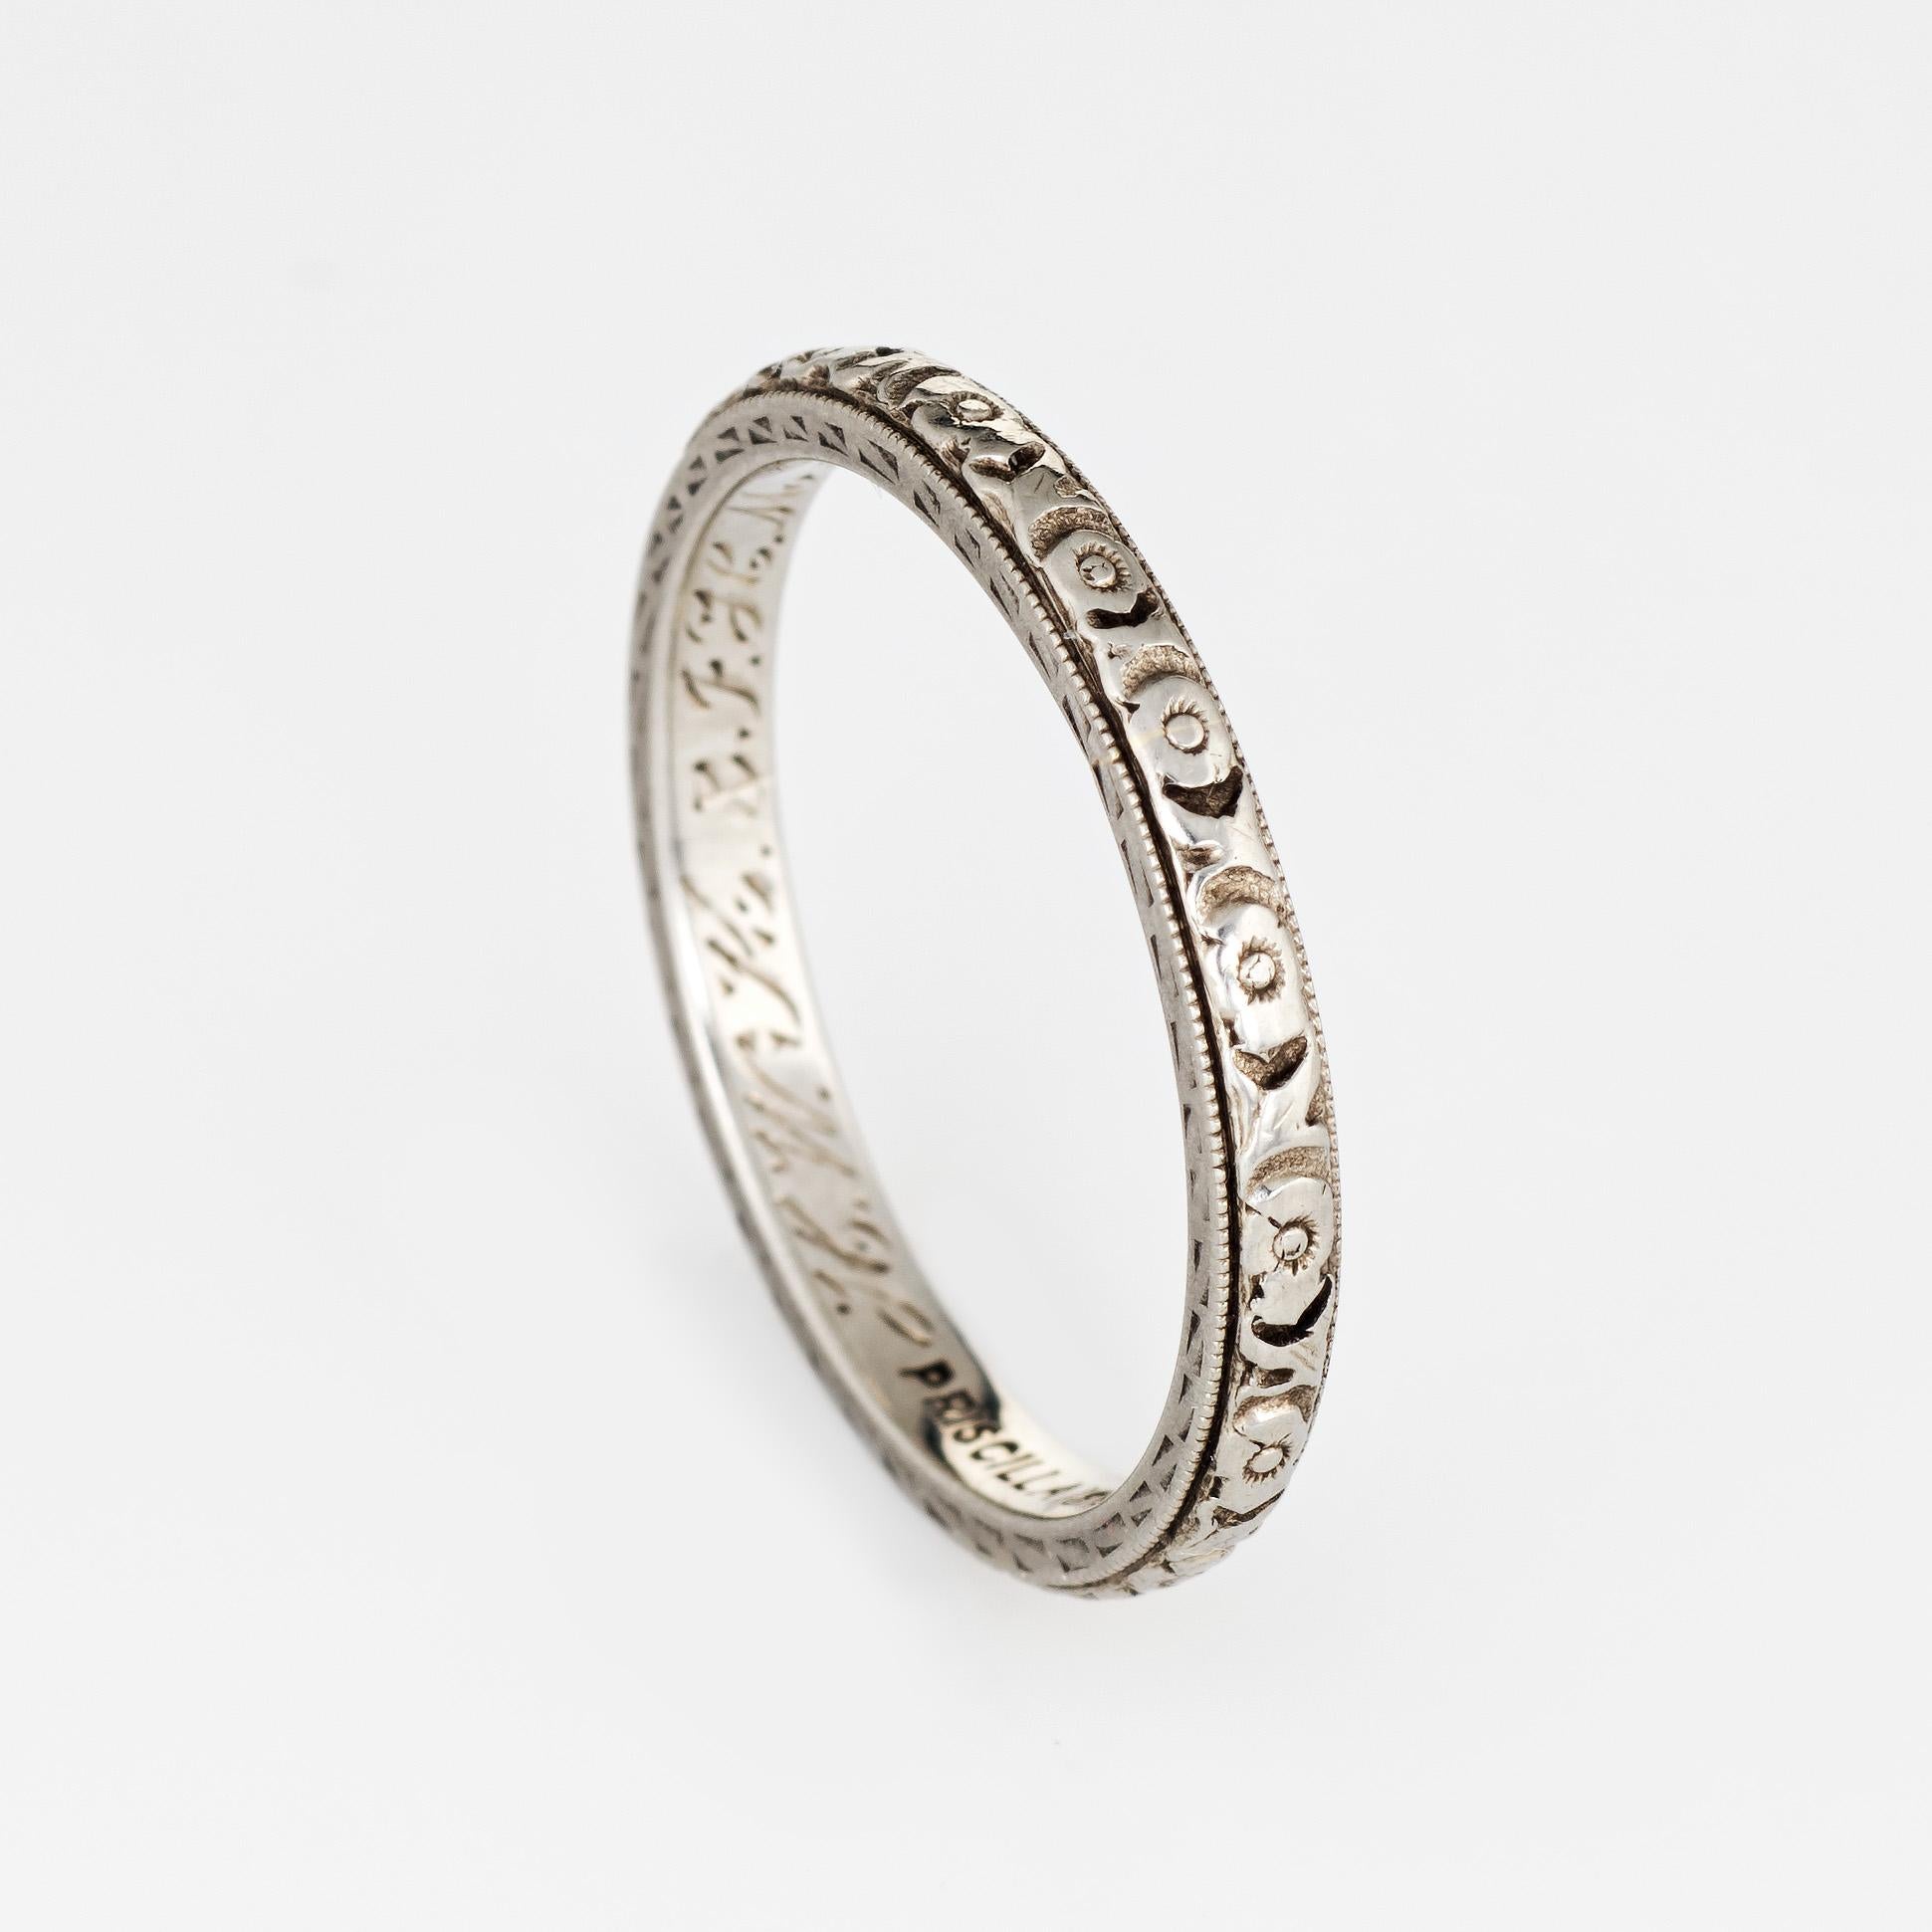 Elegant vintage Art Deco era band (circa 1920s to 1930s) crafted in 18k white gold. 

The ring epitomizes vintage charm and would make a lovely wedding band. Also great worn alone or stacked with your jewelry from any era. The inner band is 